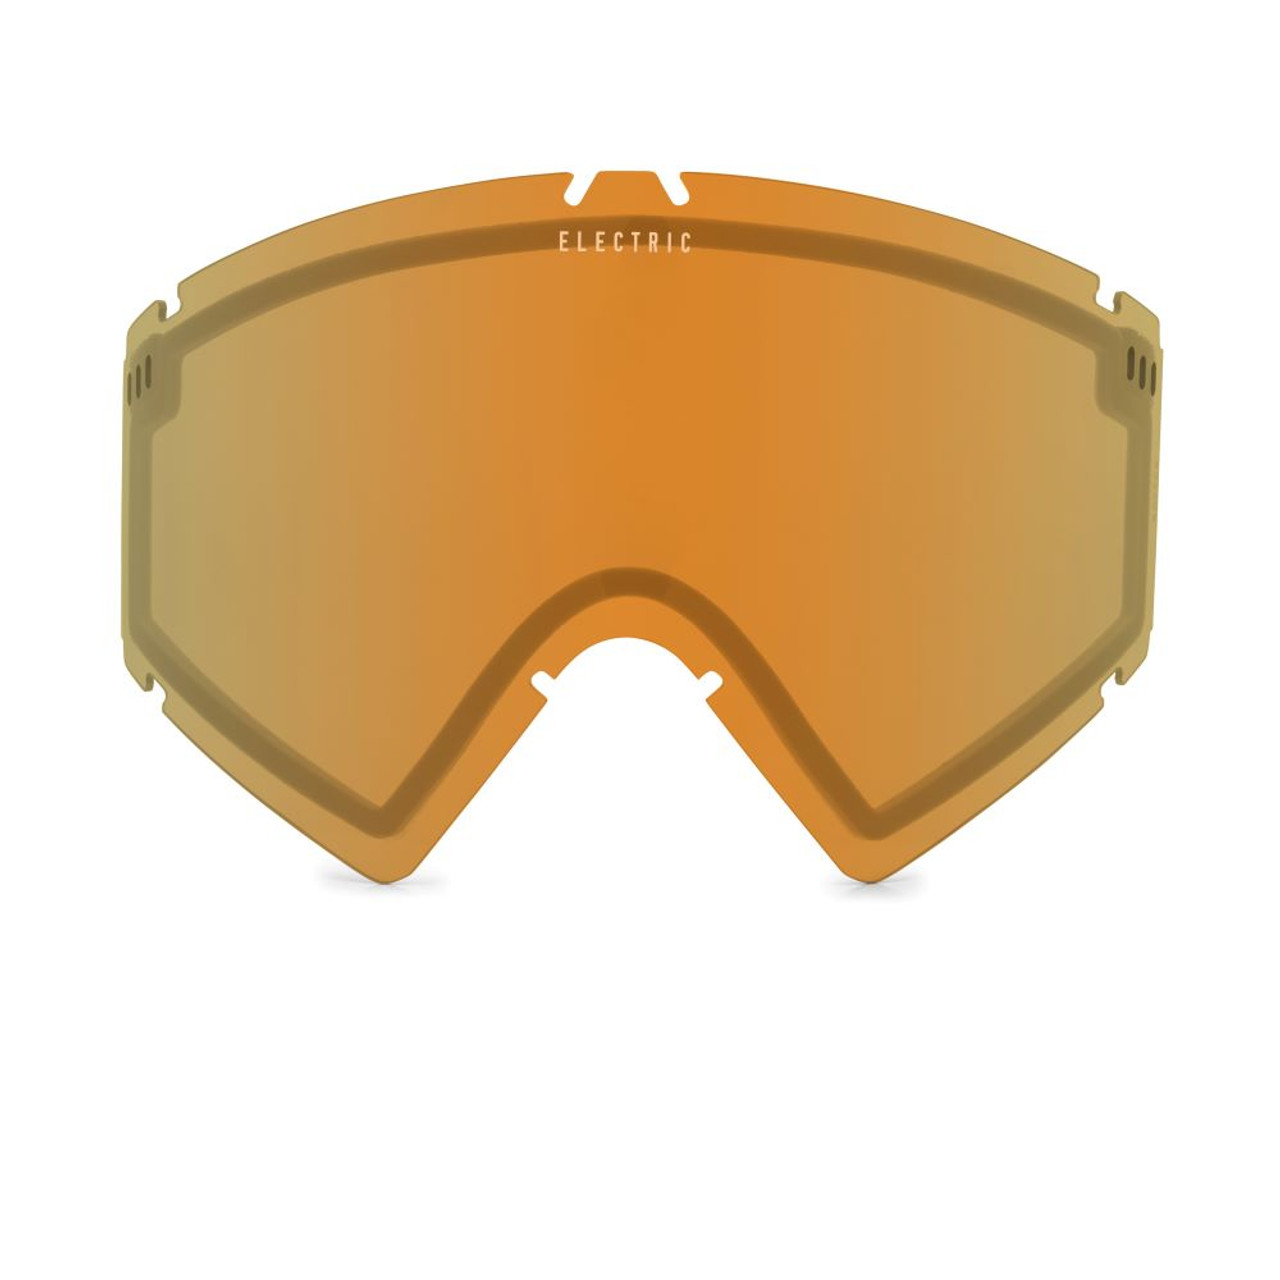 Auburn Gold - Electric Roteck Goggle Replacement Lens